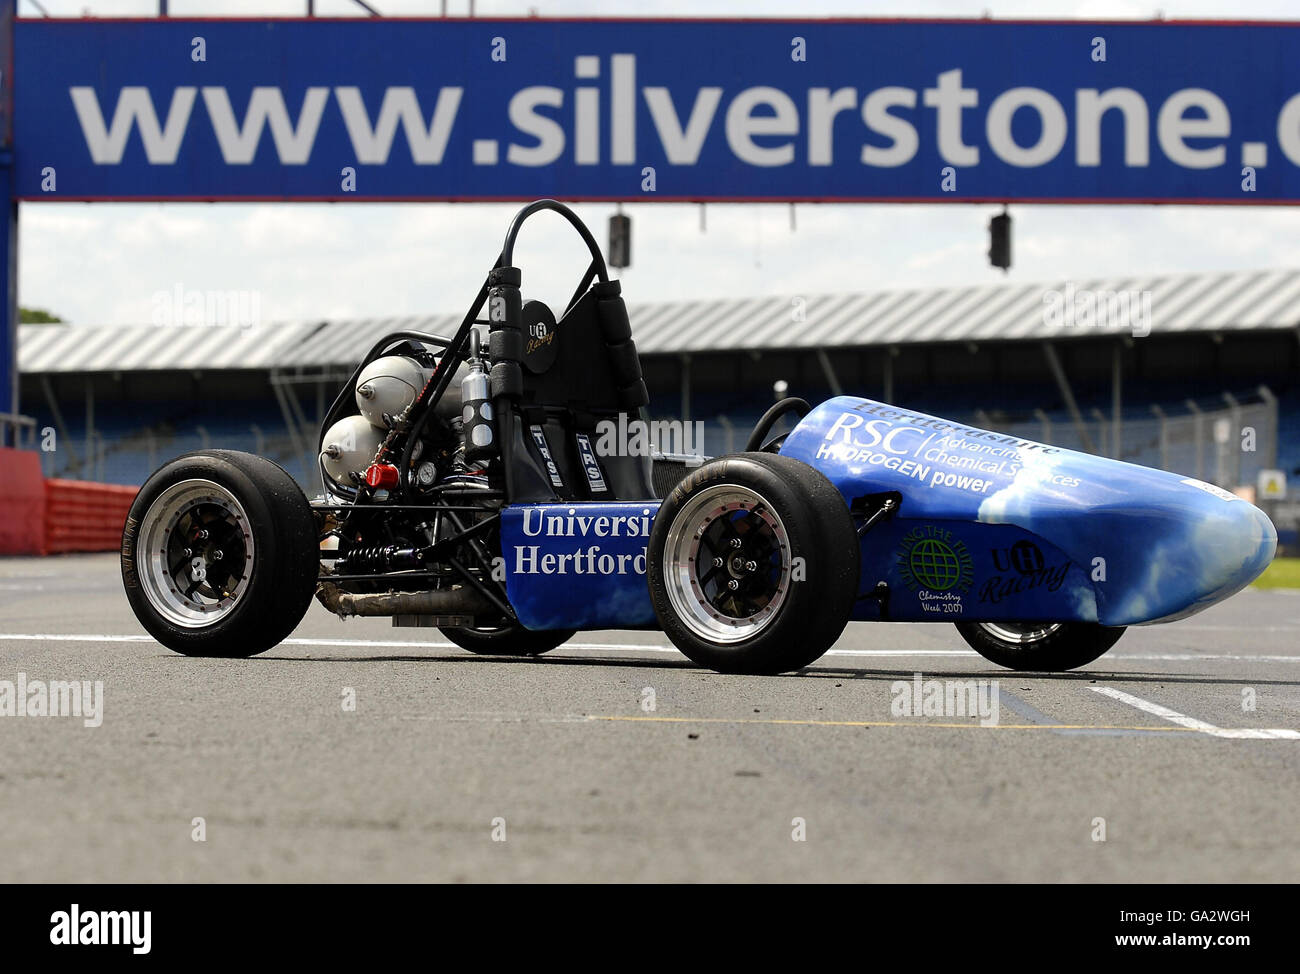 The University of Hertfordshire hydrogen powered race car at Silverstone circuit in Northamptonshire. Stock Photo